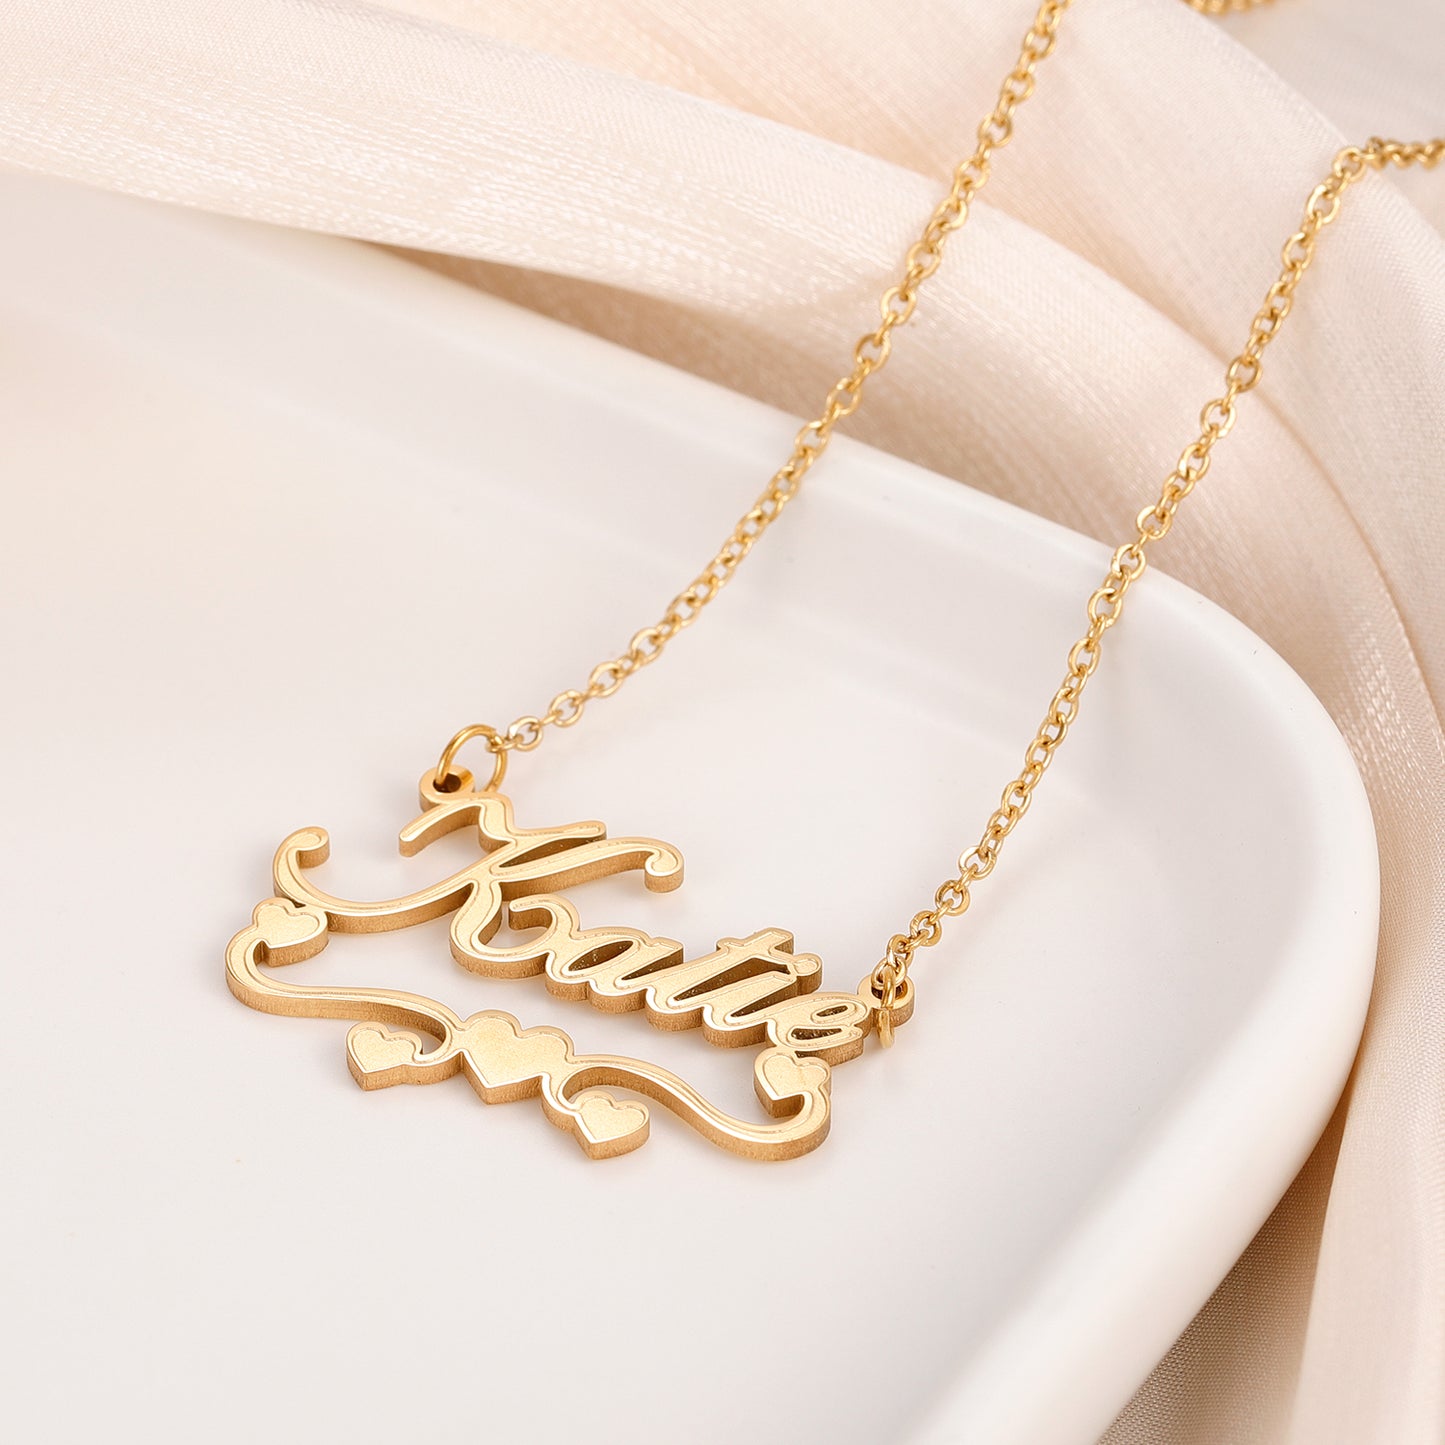 Personalised Bespoke Girls Single Name Necklace - Baby & Kids, Toddler, Teenager Jewellery in Arabic English - Gifts Eid Birthday  - ISABELLA